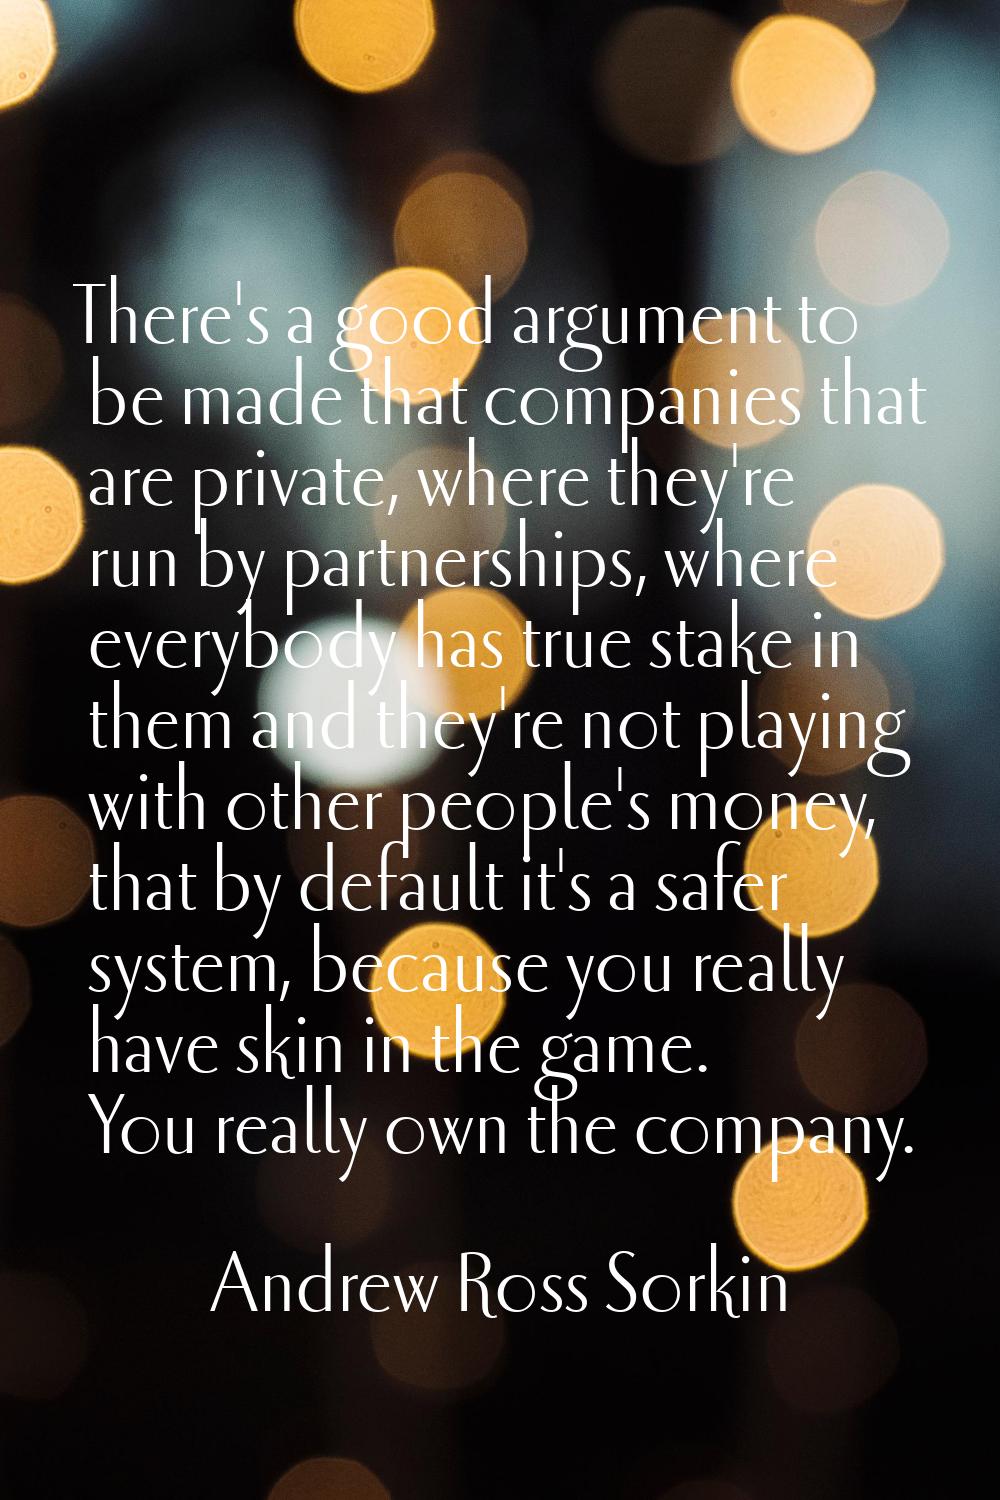 There's a good argument to be made that companies that are private, where they're run by partnershi